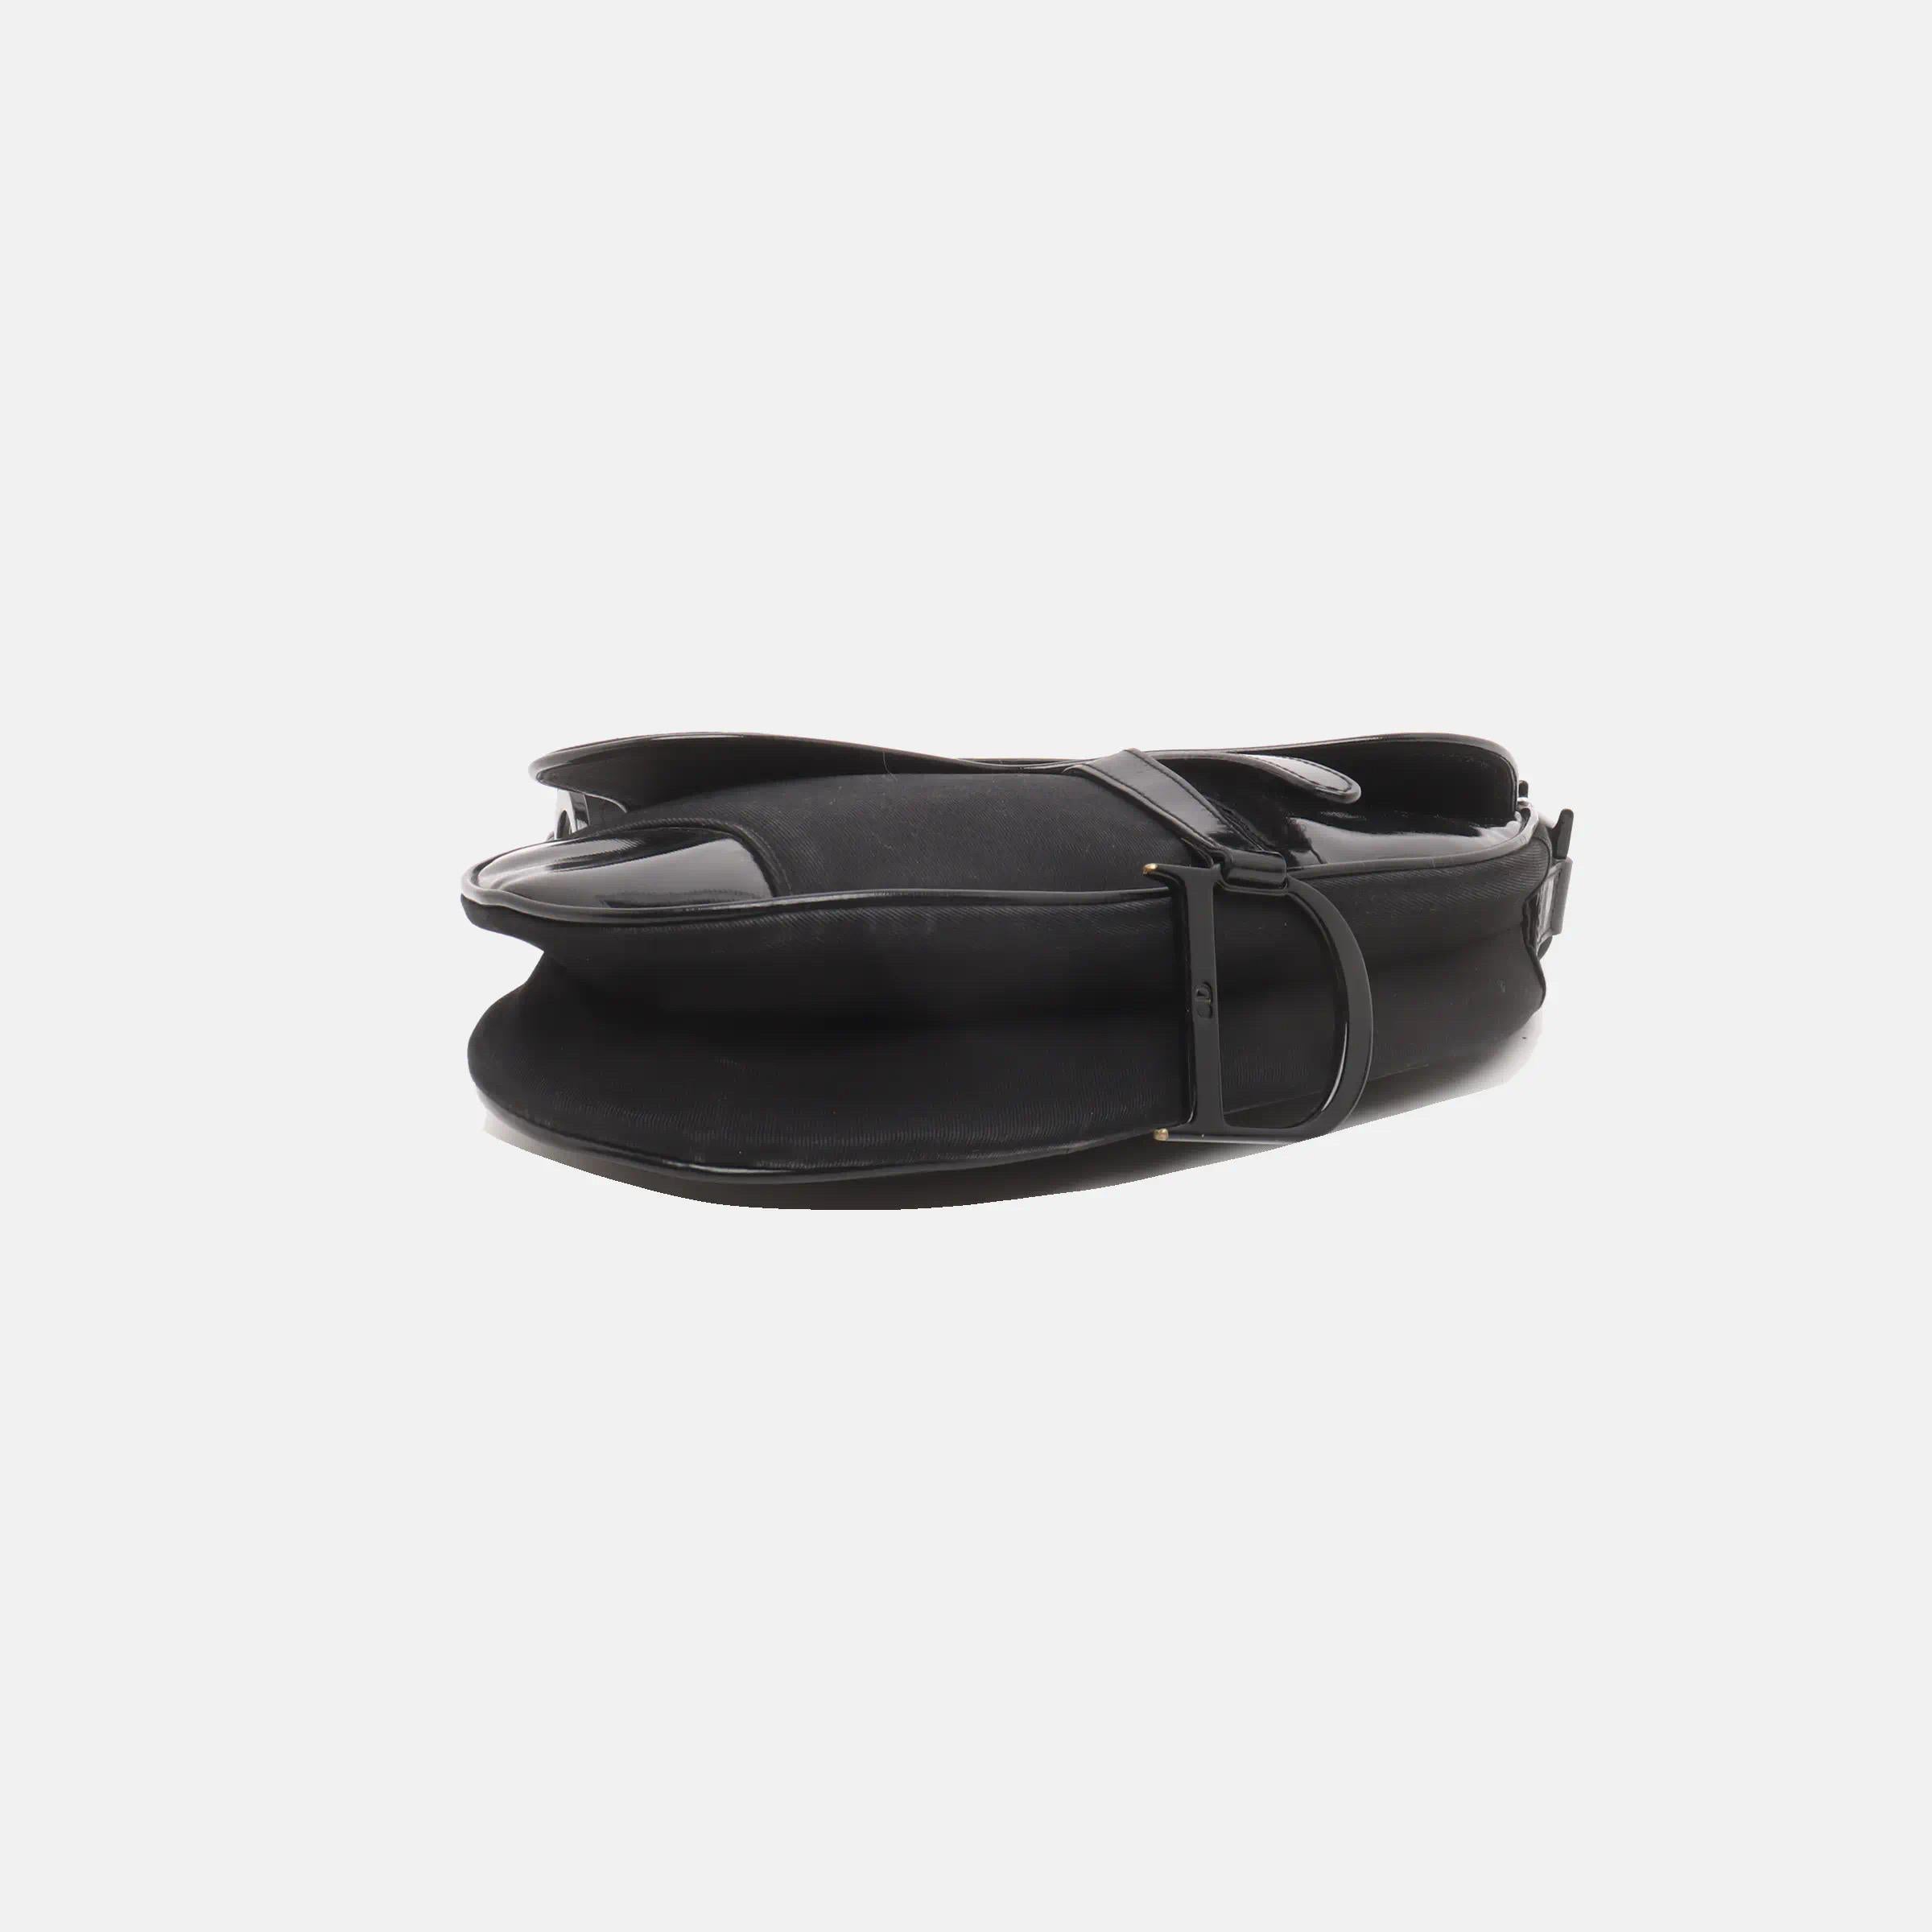 The Dior Saddle Vintage Black is an iconic kidney-shaped saddle bag, originally designed by John Galliano. This vintage version offers more room and a softer feel compared to the modern reissue. Perfect for adding a touch of classic elegance to any